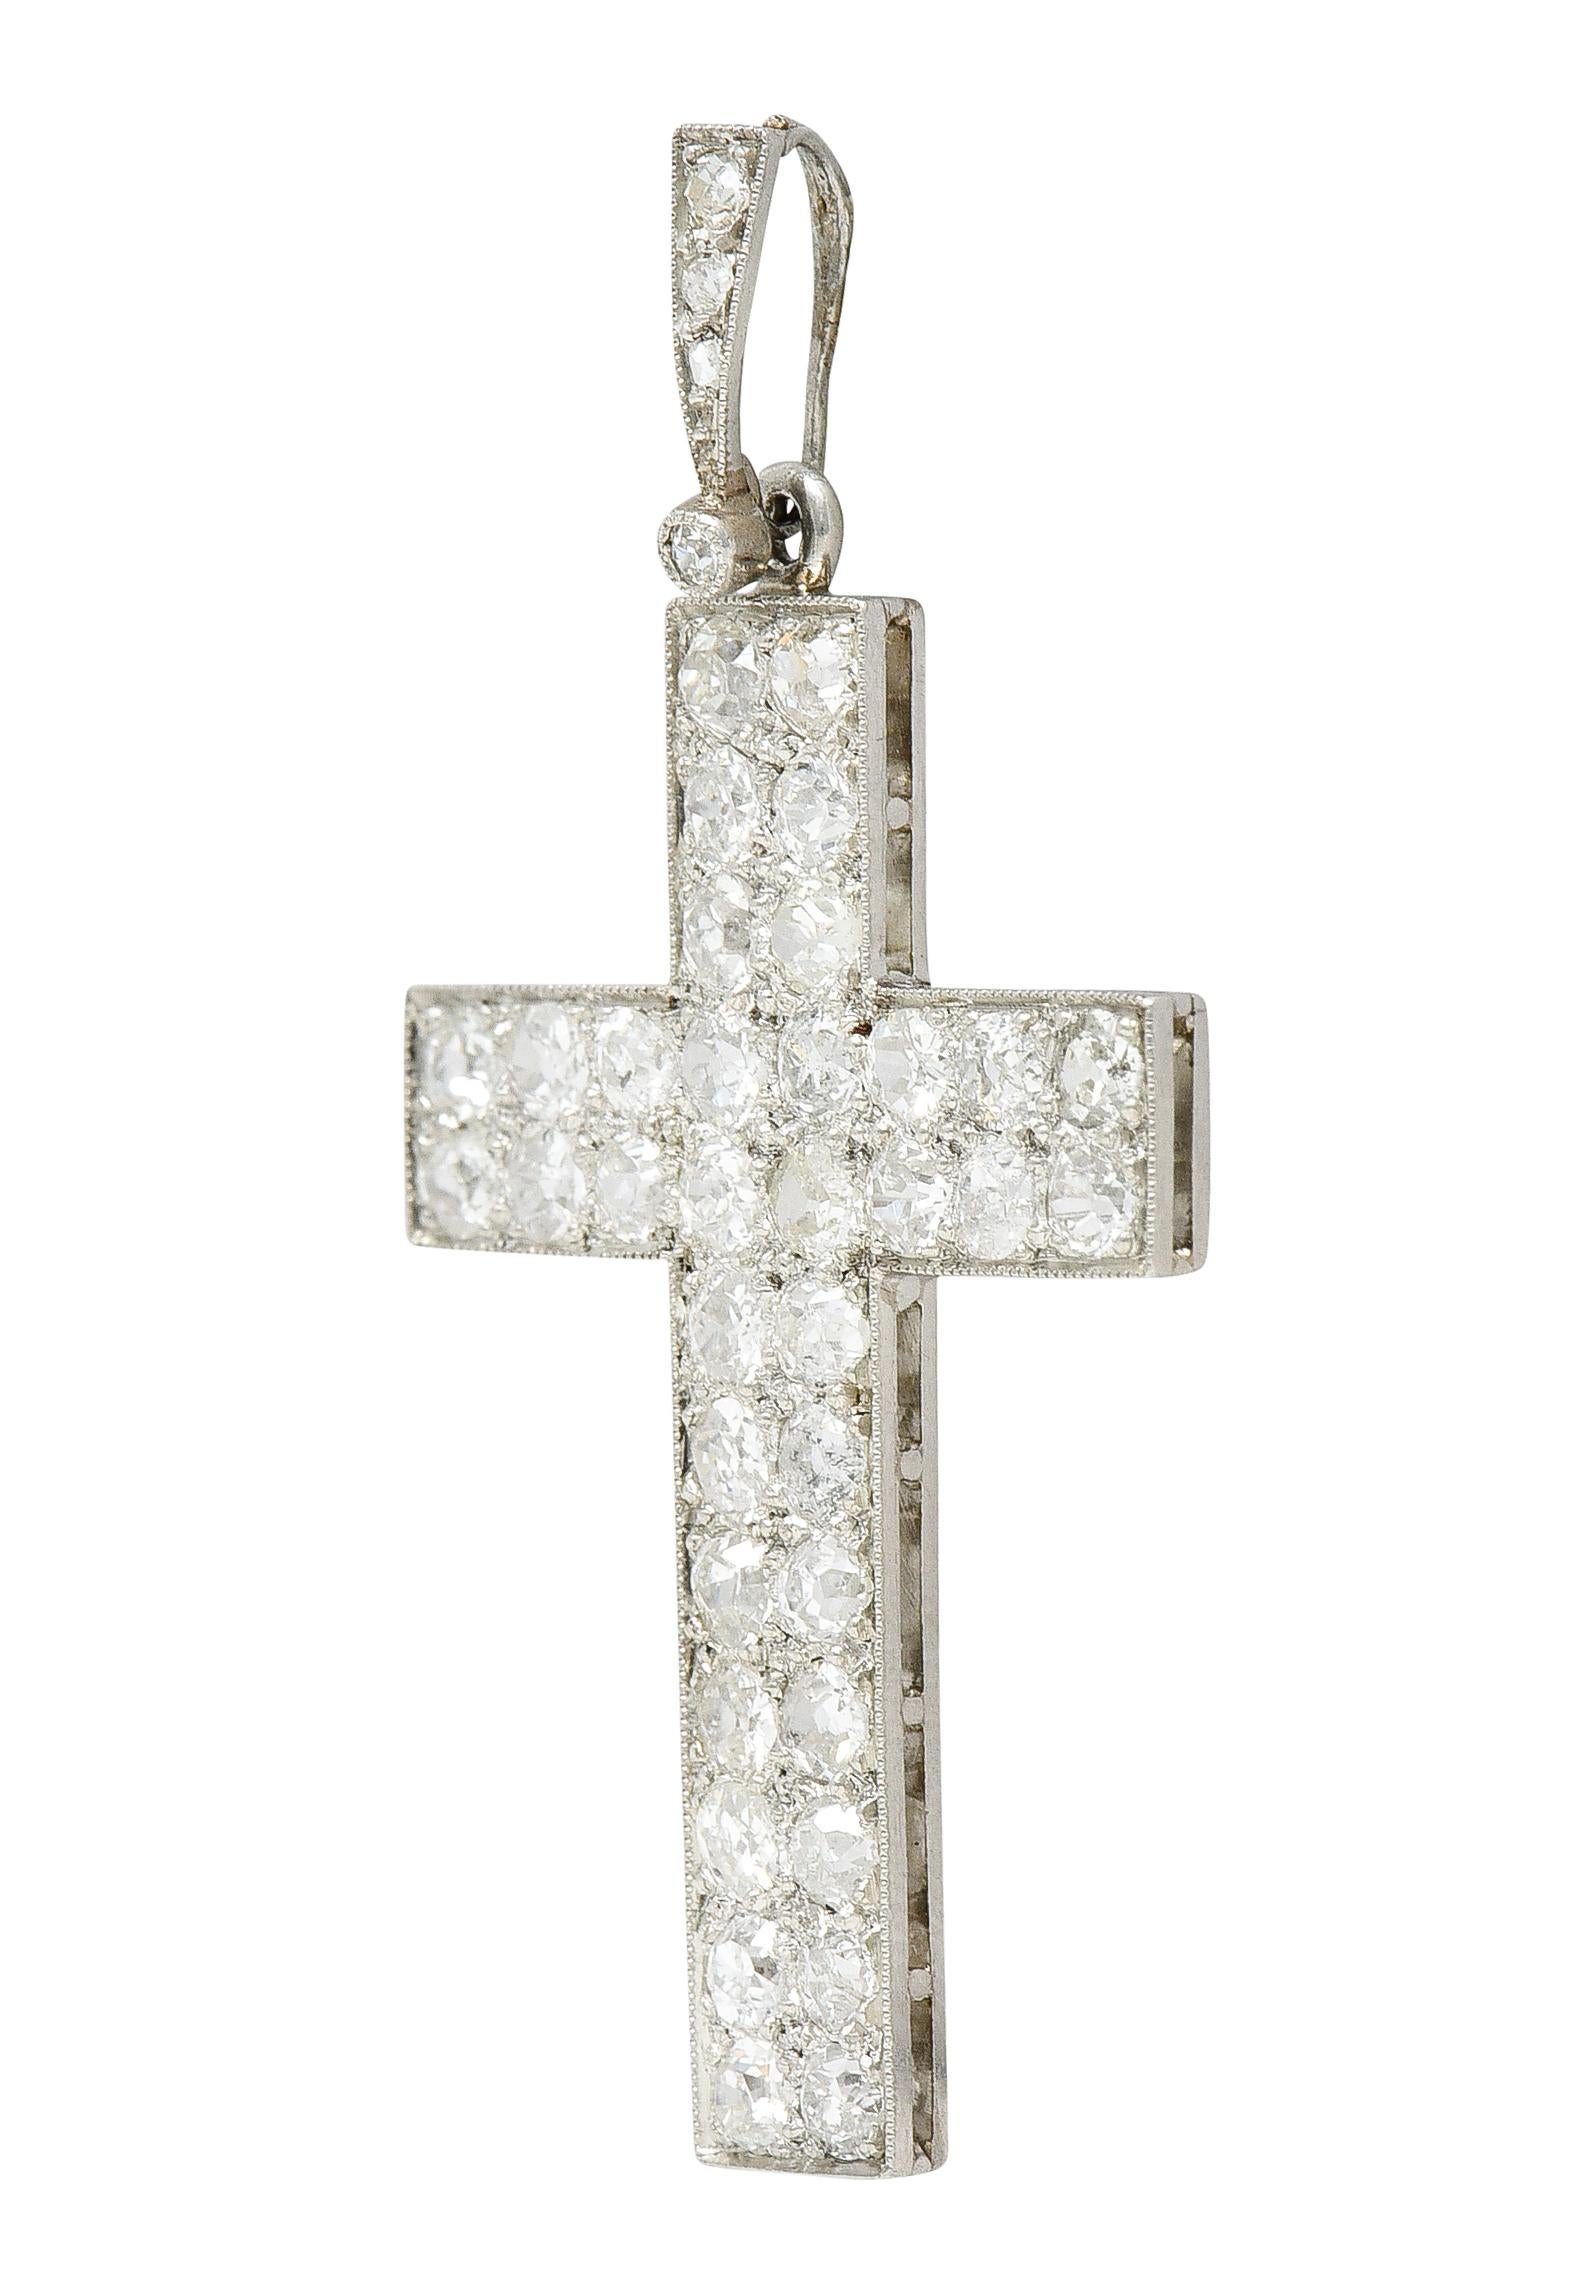 Pendant is designed as a cross pavè set throughout by old European cut diamonds

With a stylized milgrain bale also accented by old European cut diamonds

Weighing in total approximately 3.50 carats with H to K color with SI2 clarity

French maker's